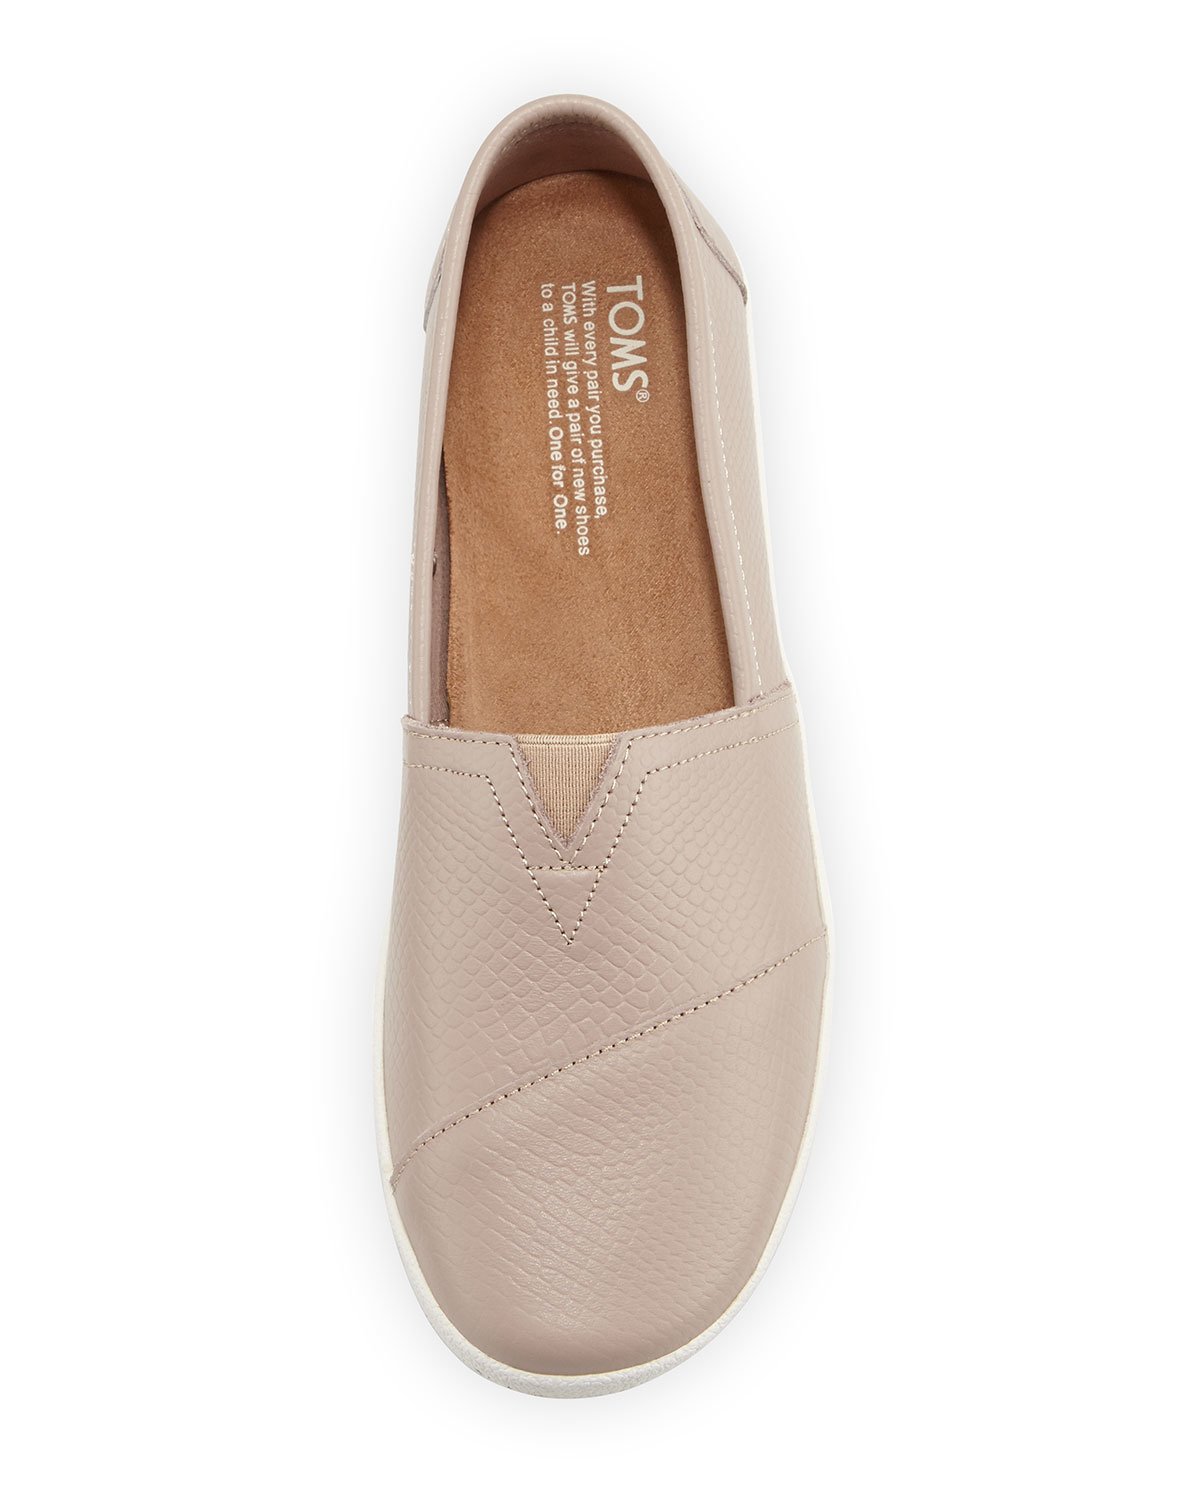 TOMS Avalon Leather Slip-On Flats in Natural - Lyst